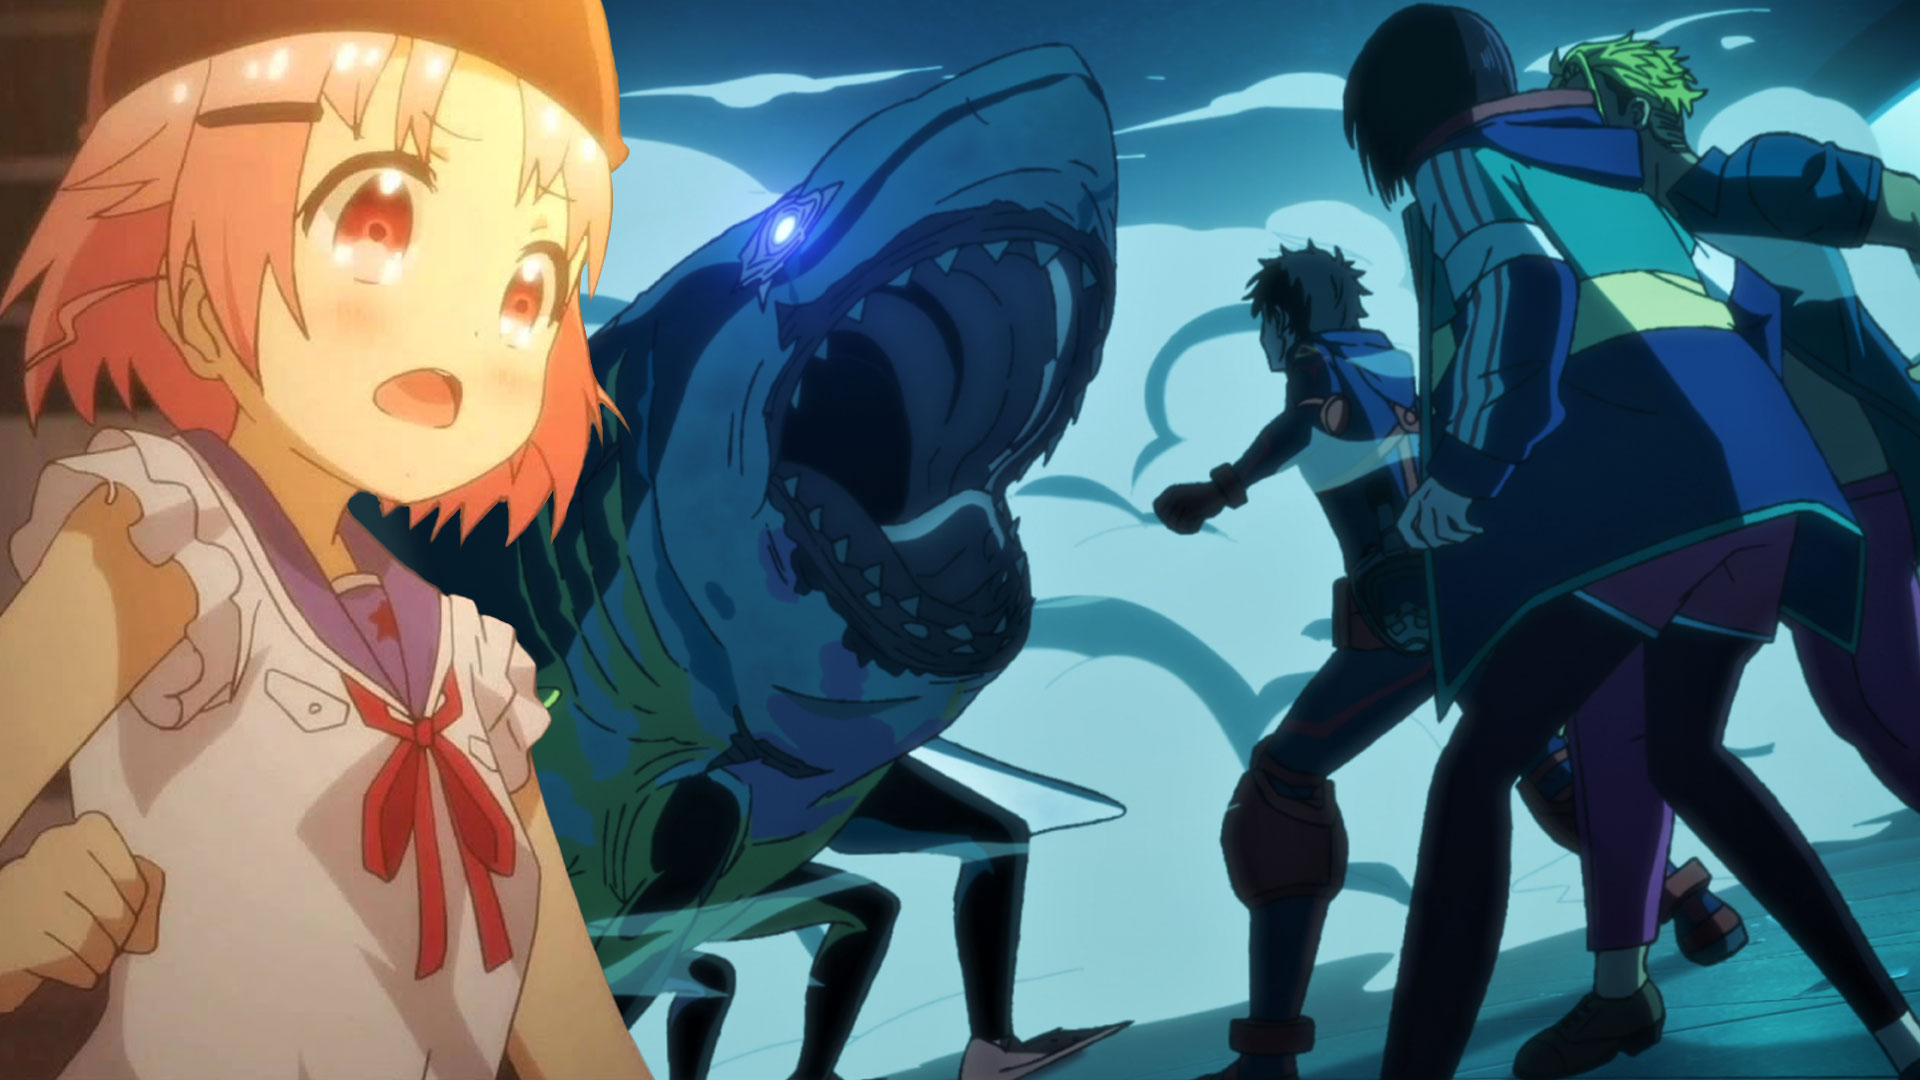 Zombies Done Right: 5 Anime and Manga With Interesting Takes on Zombie Apocalypse